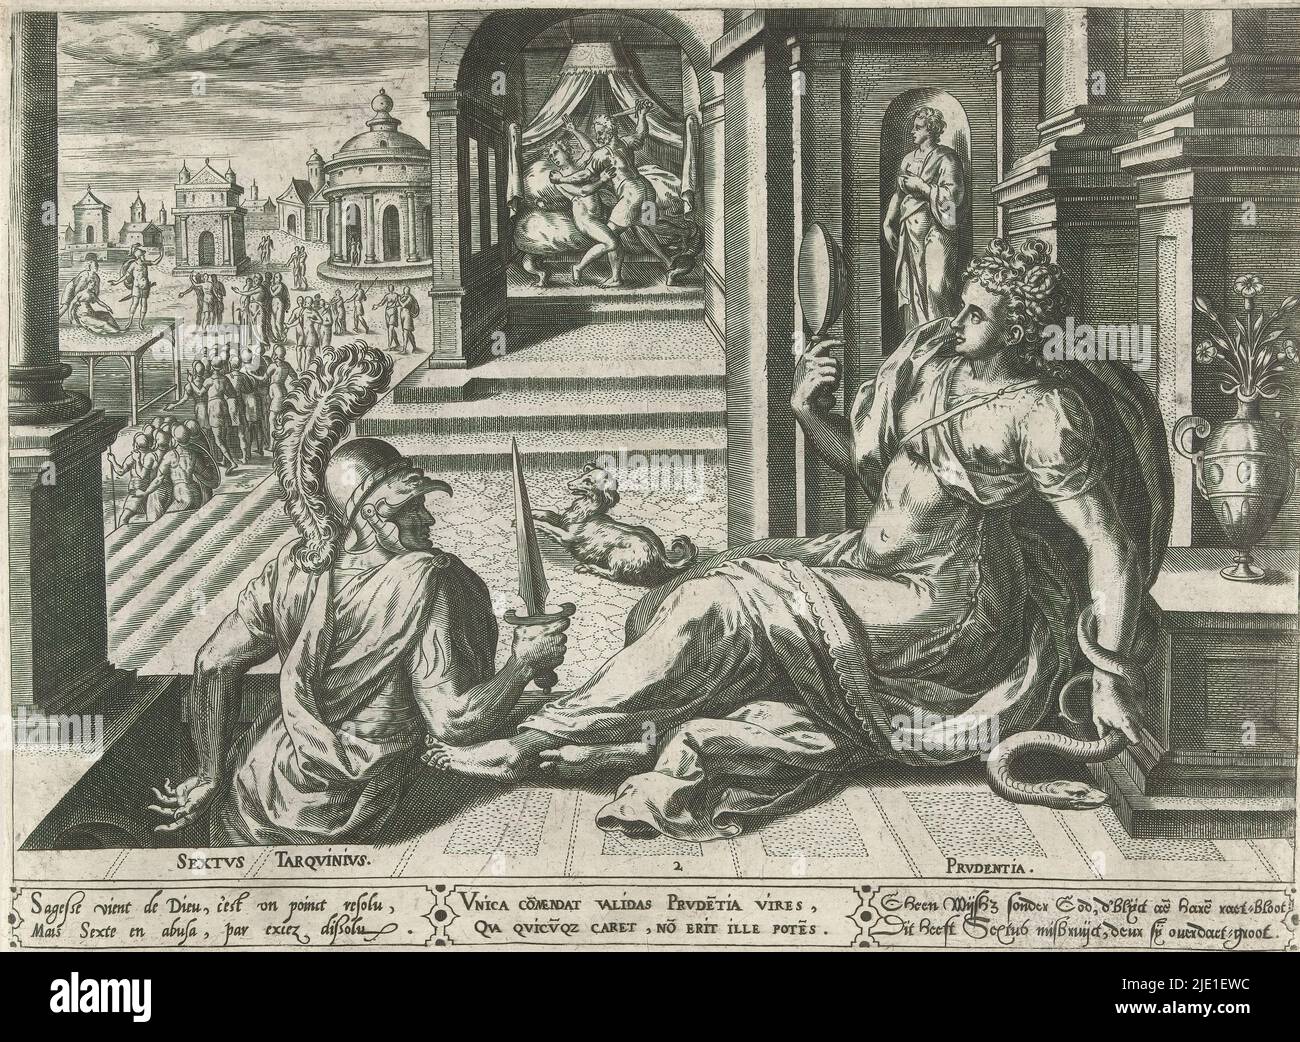 Sextus Tarquinius and Prudence (Prudentia), The seven chief virtues and their human counterparts (series title), Allegory of Prudence and Lightness. Back left, the Roman people are being roused by Lucretia's husband to oppose the Tarquinius dynasty. The print has a Latin, French and Dutch caption and is part of a series on the seven virtues., print maker: Hans Collaert (I), (mentioned on object), after design by: Crispijn van den Broeck, (attributed to), publisher: Adriaen Huybrechts (I), (mentioned on object), Antwerp, 1576, paper, engraving, height 188 mm × width 258 mm Stock Photo